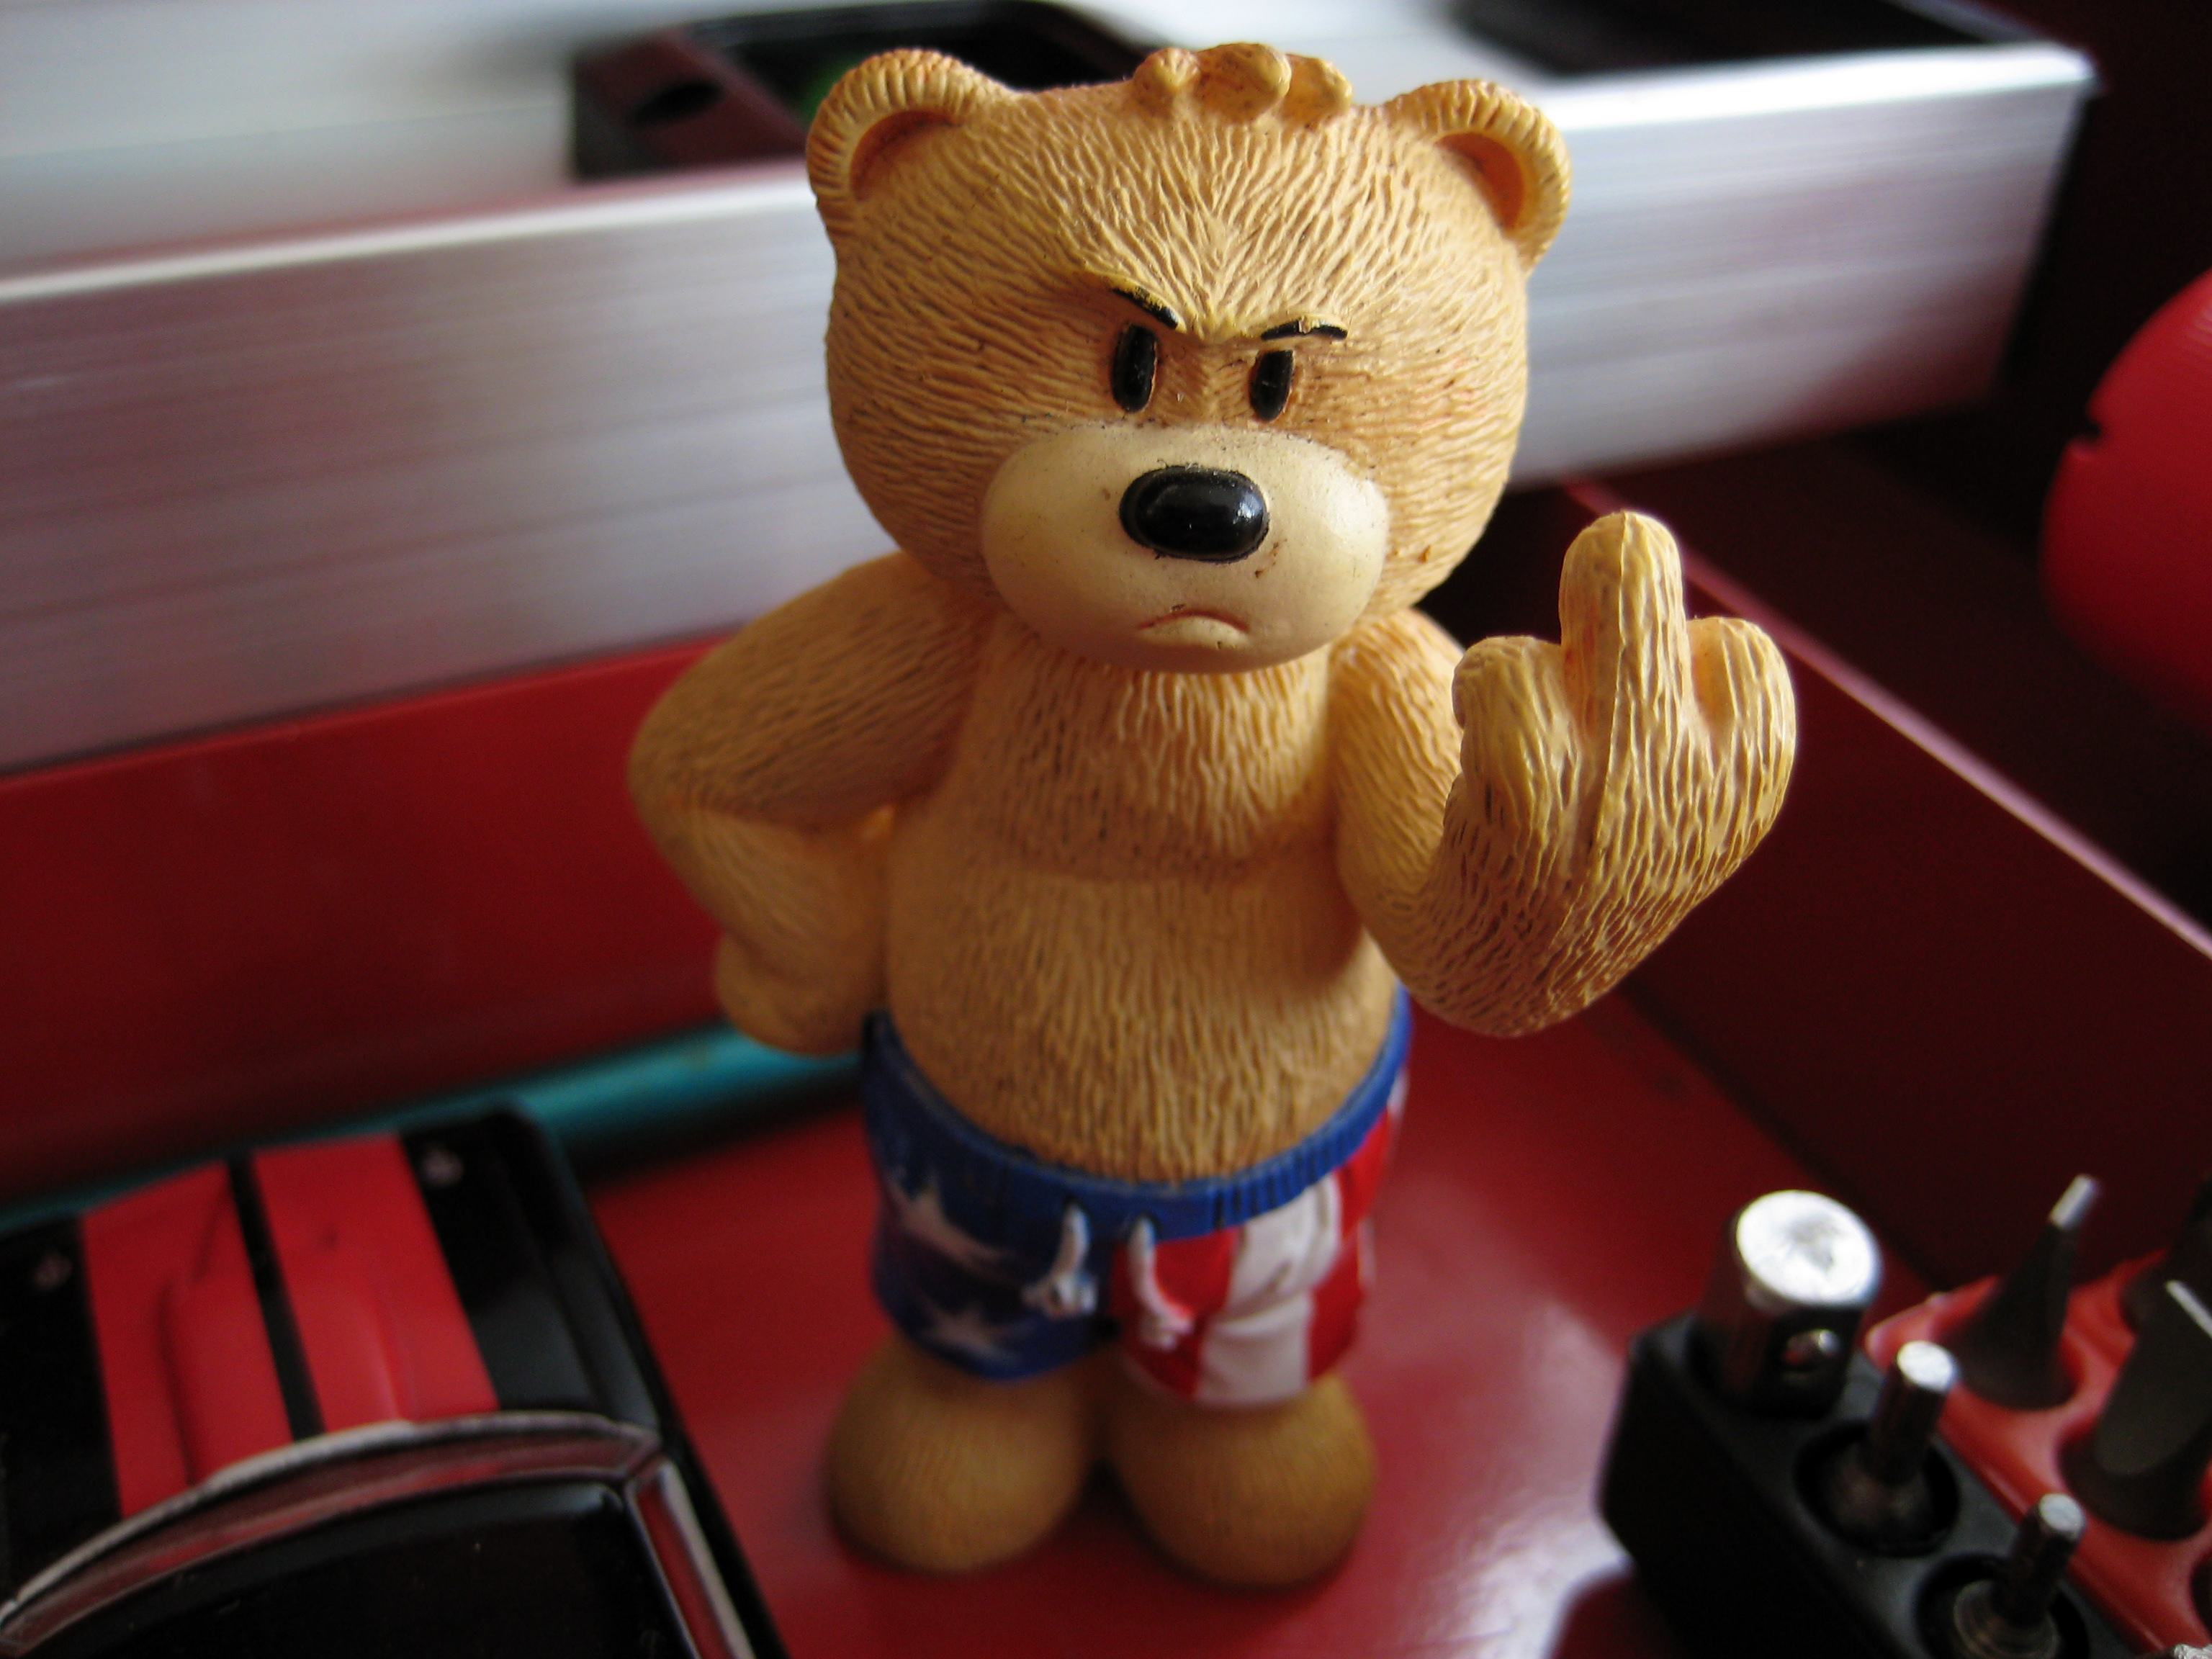 Middle finger teddy bears wallpaper - (#170208) - High Quality and ...